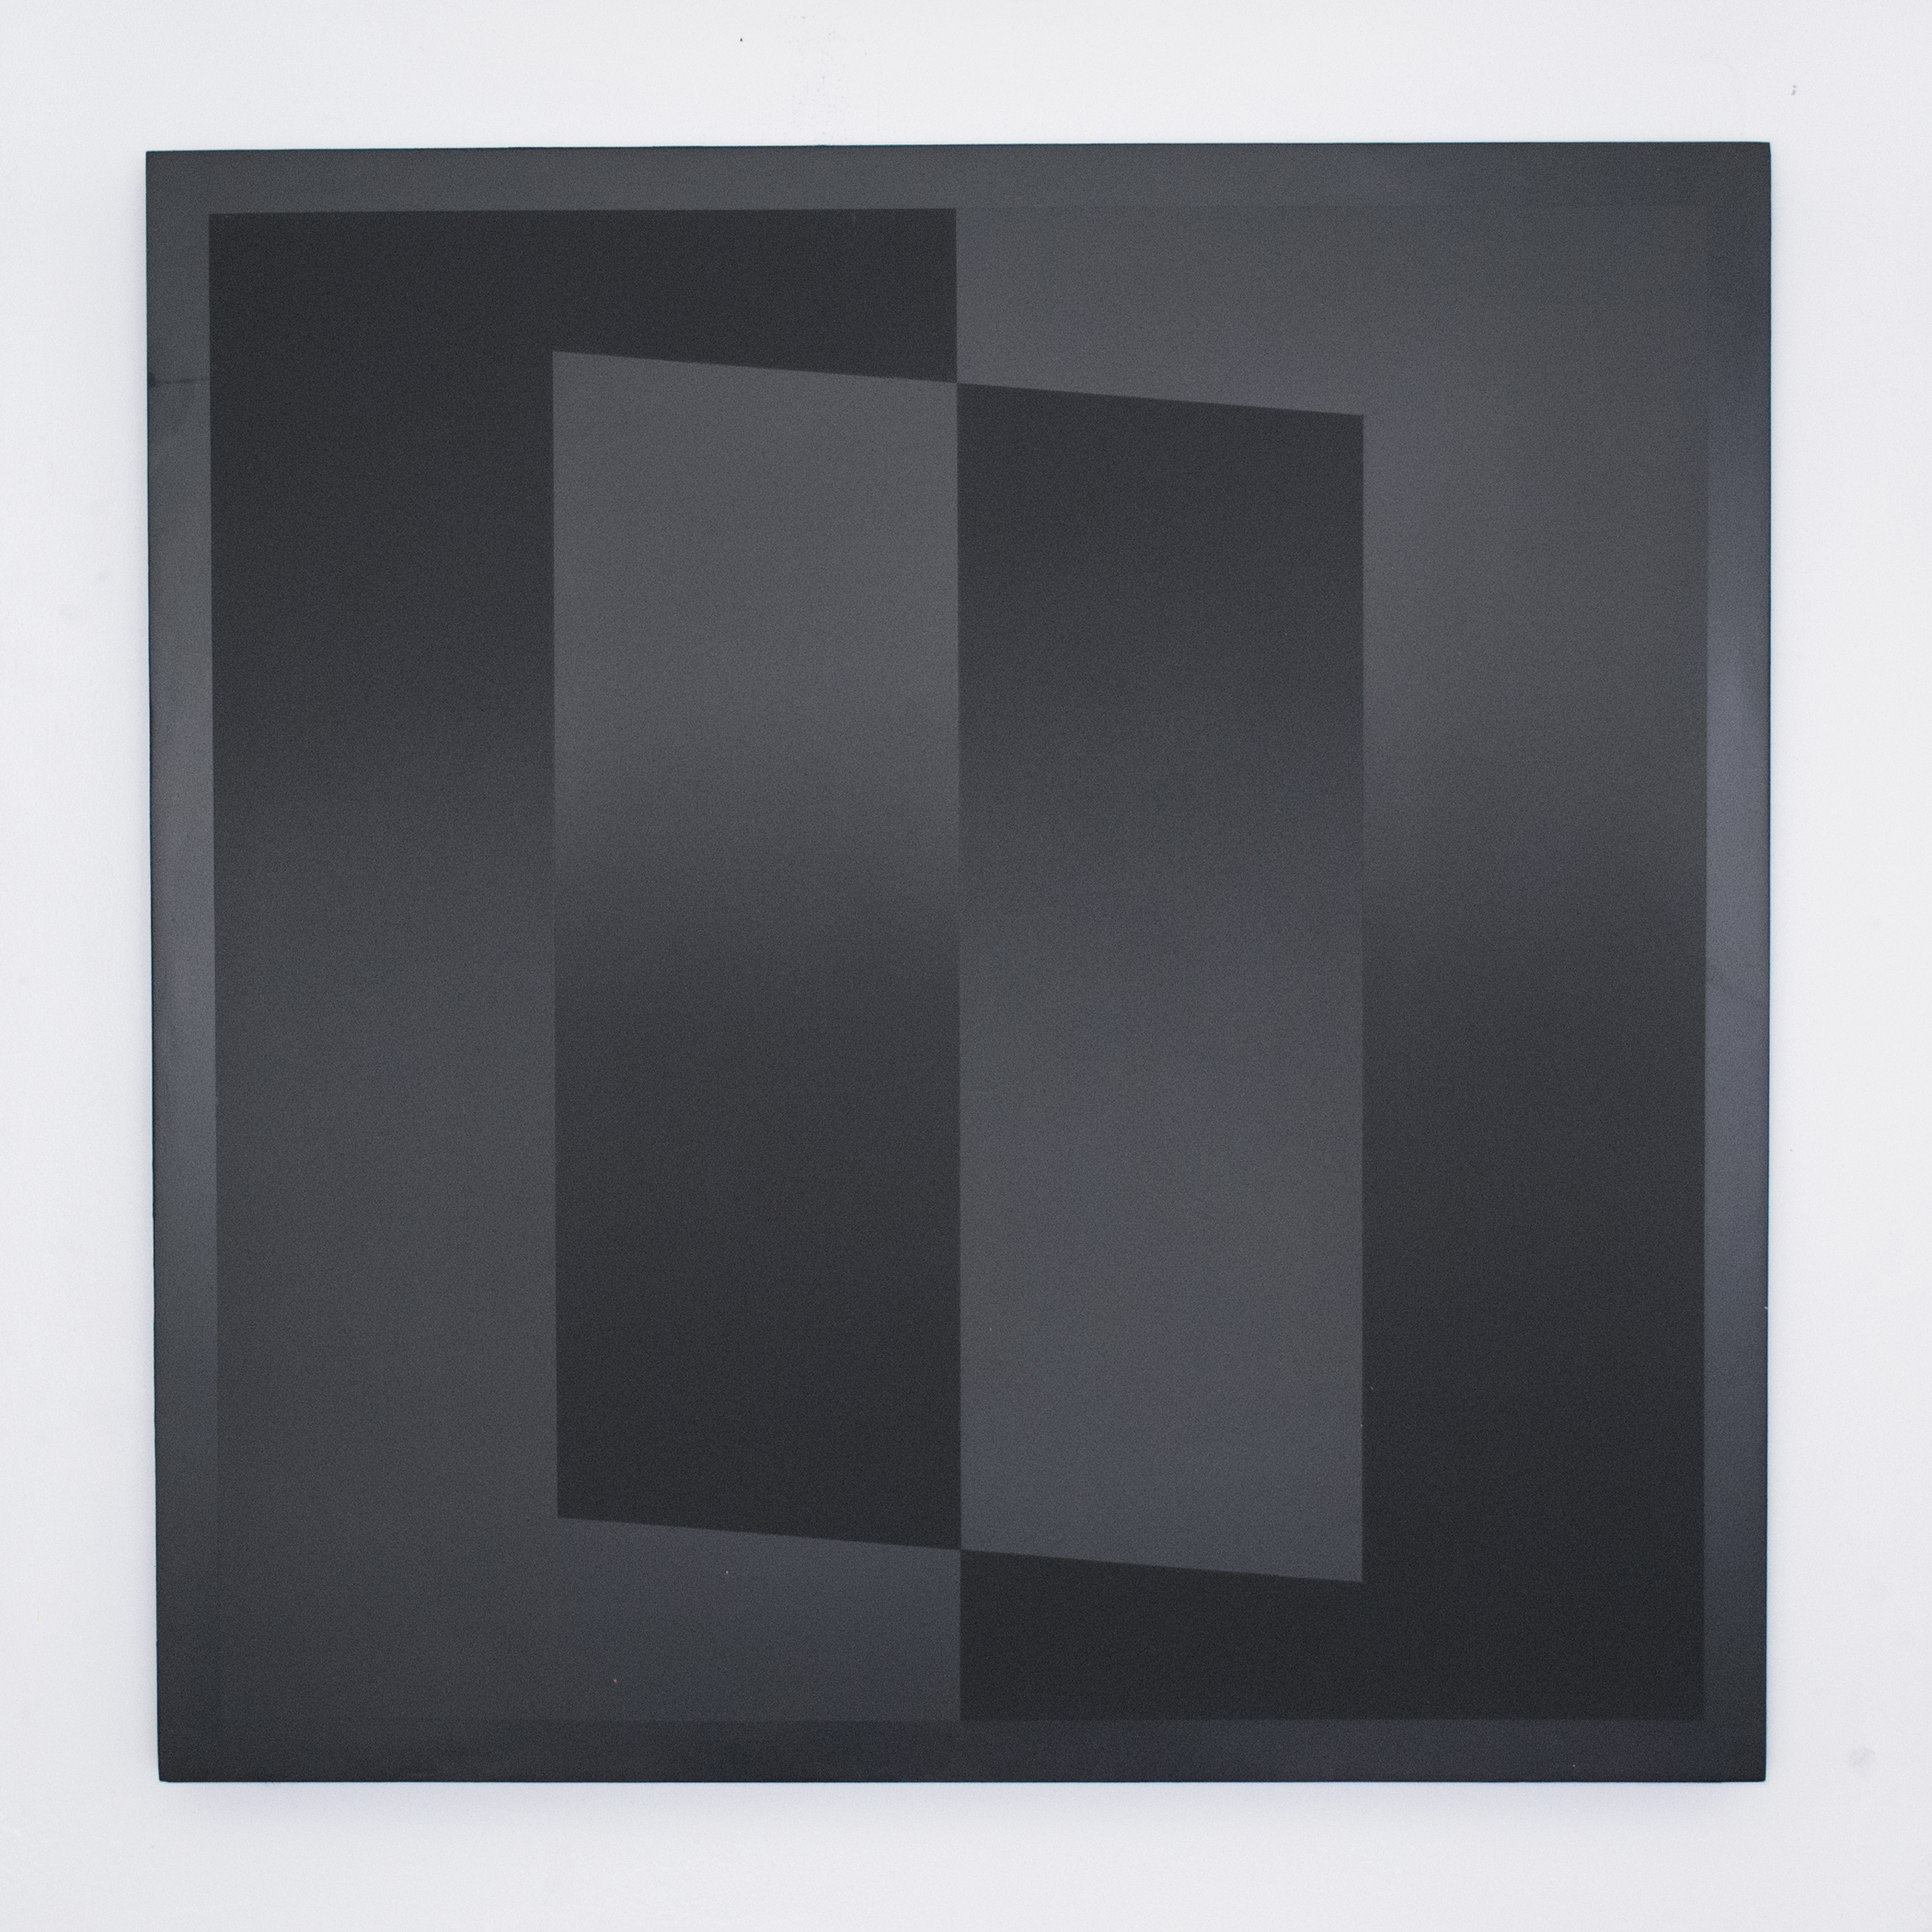 untitled - two parallelograms in two rectangles, matte/gloss)